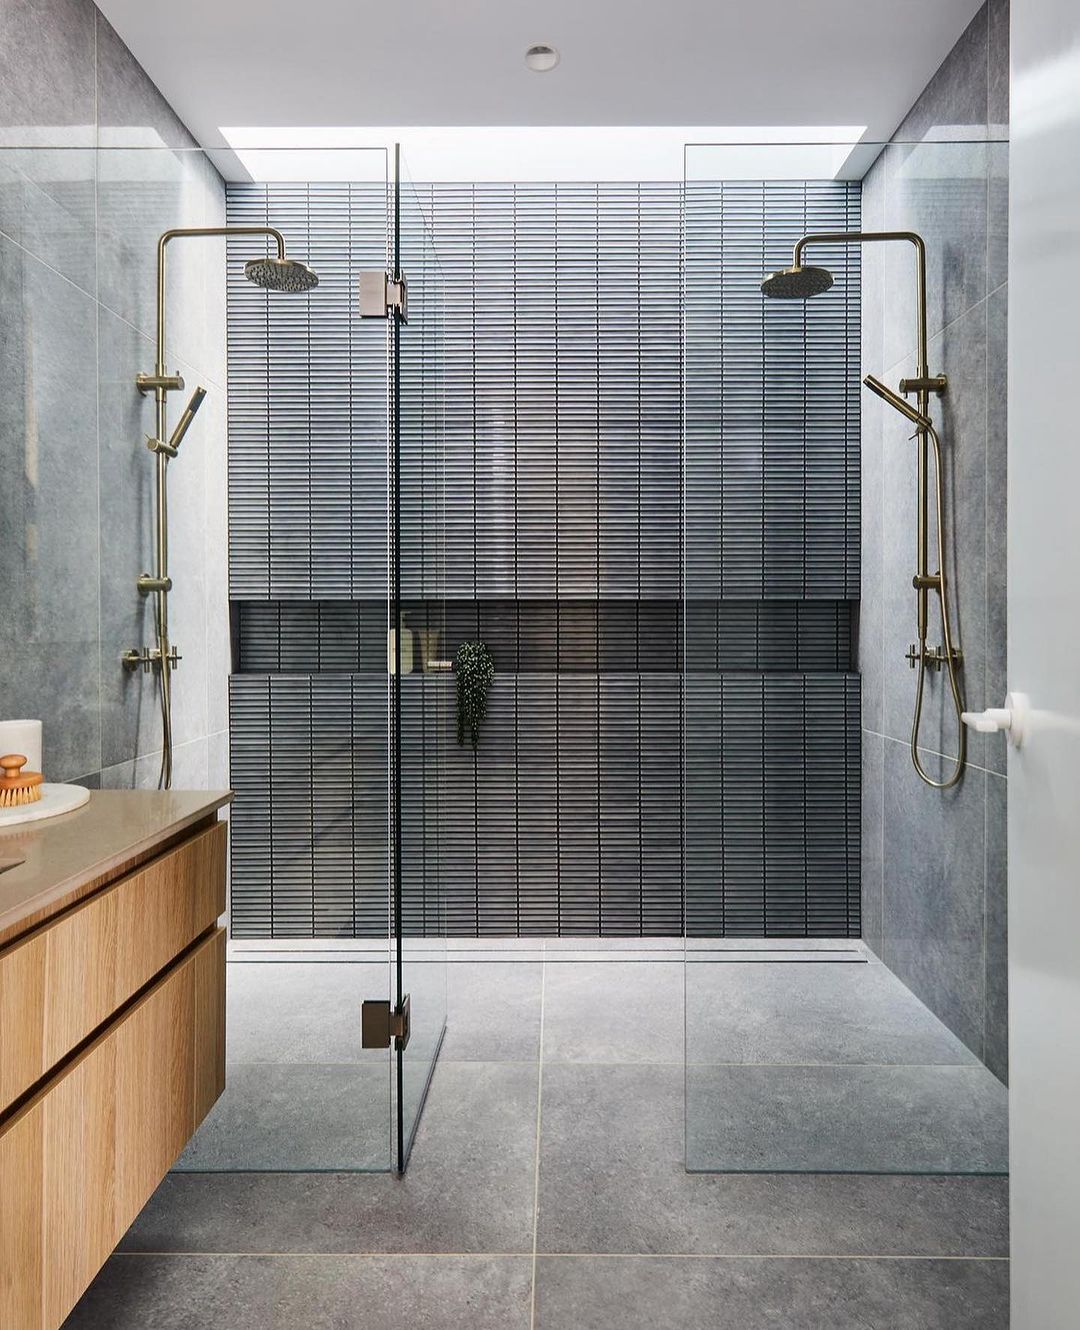 Modern Contrast with Textured Large Tiles